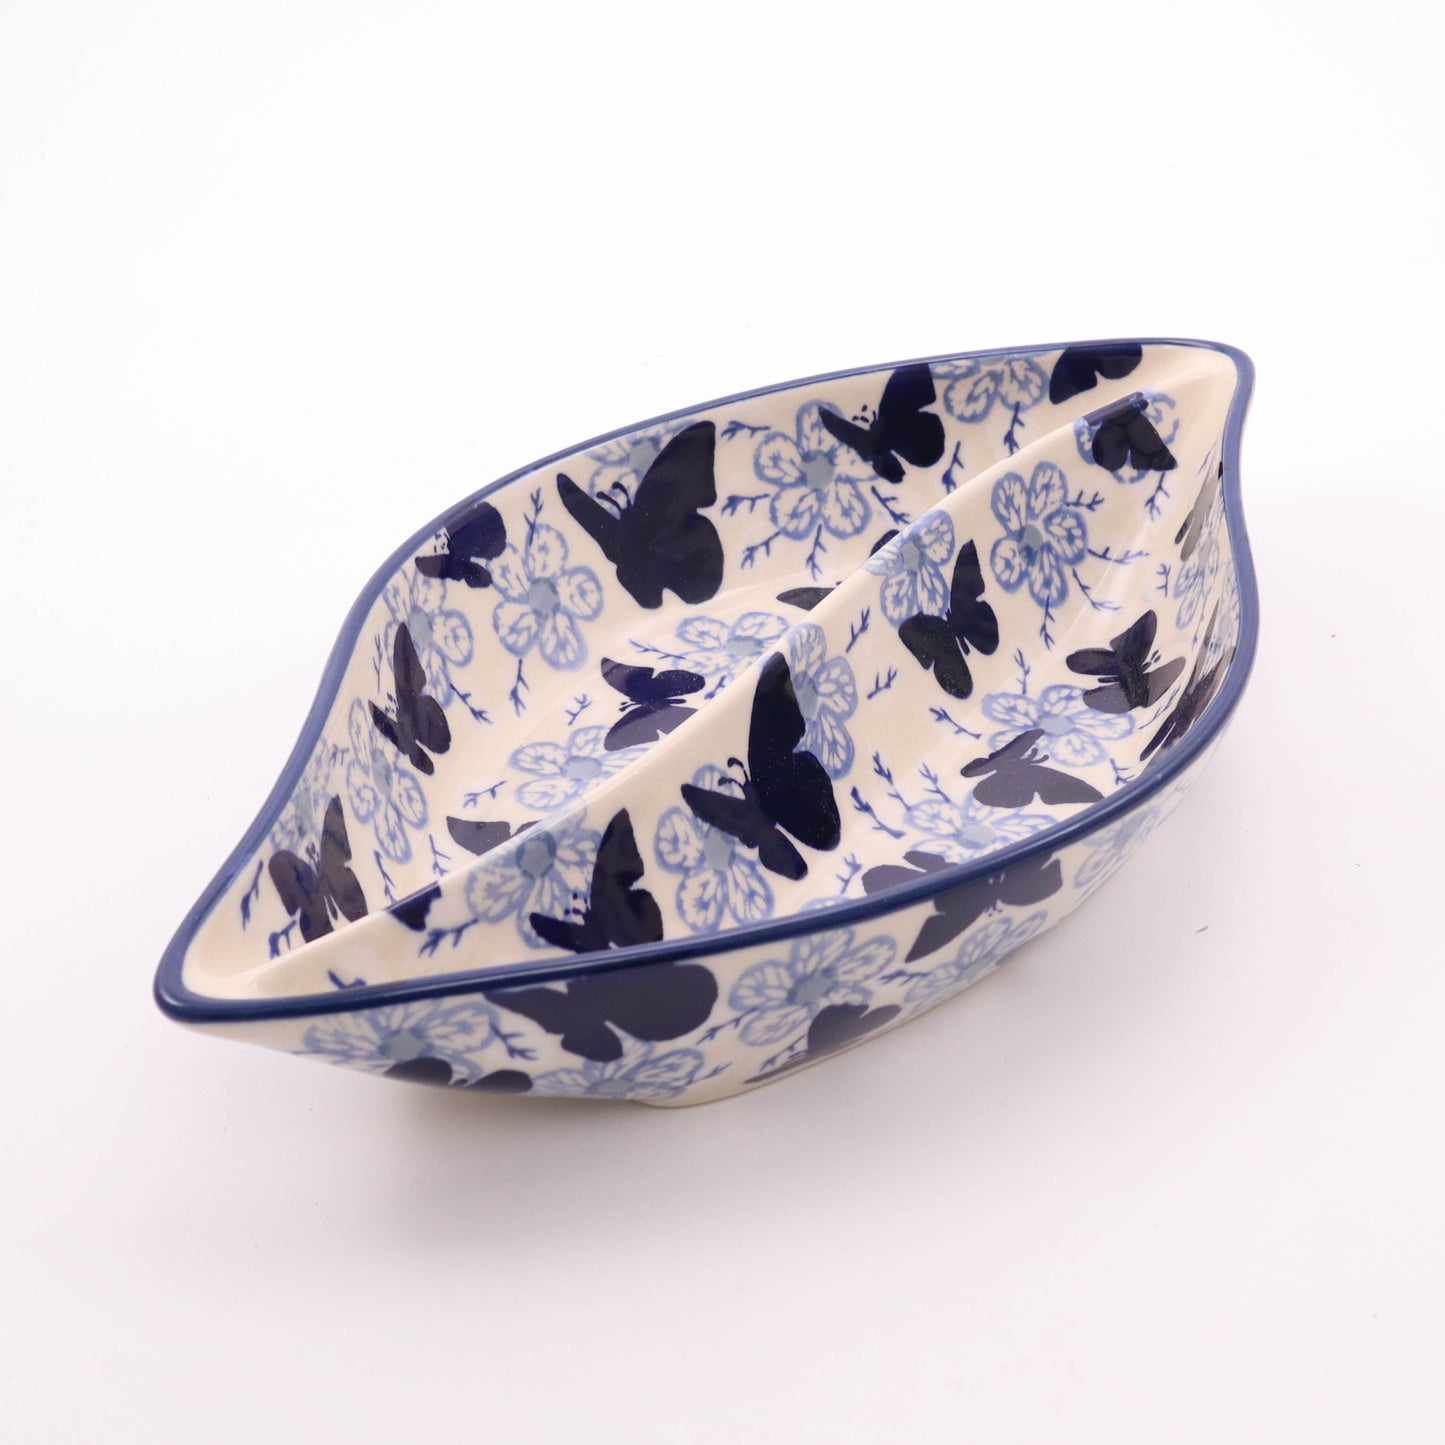 12"x6.5"x2" Divided Dish. Pattern: Butterfly Delight